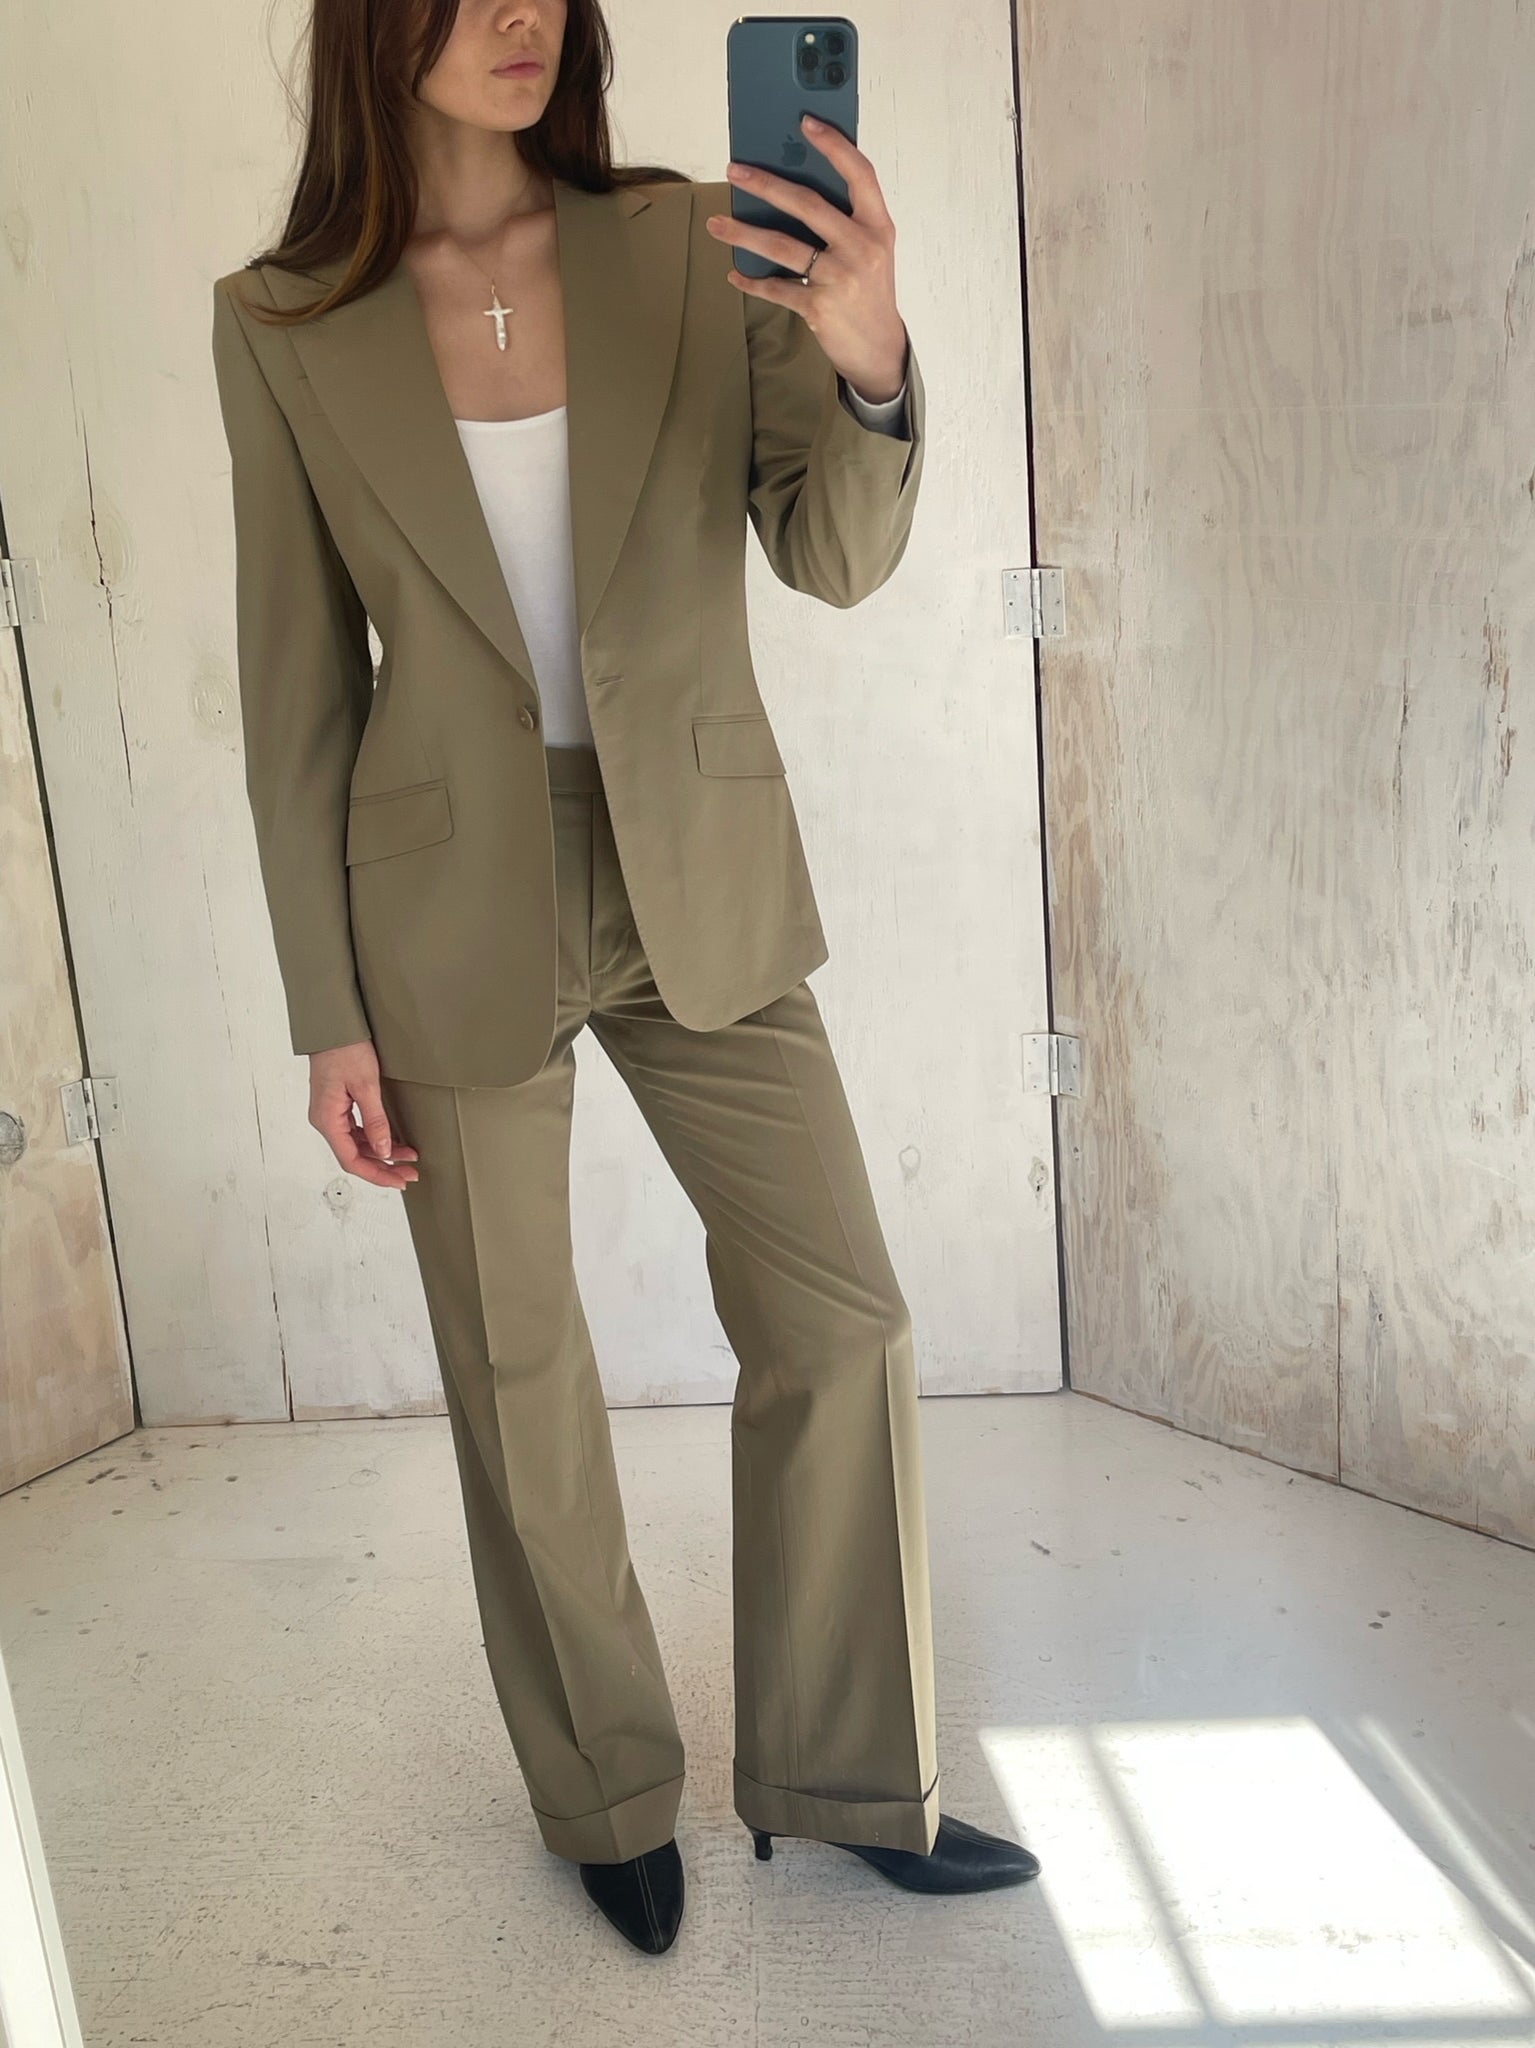 Thierry Mugler Pant Suit